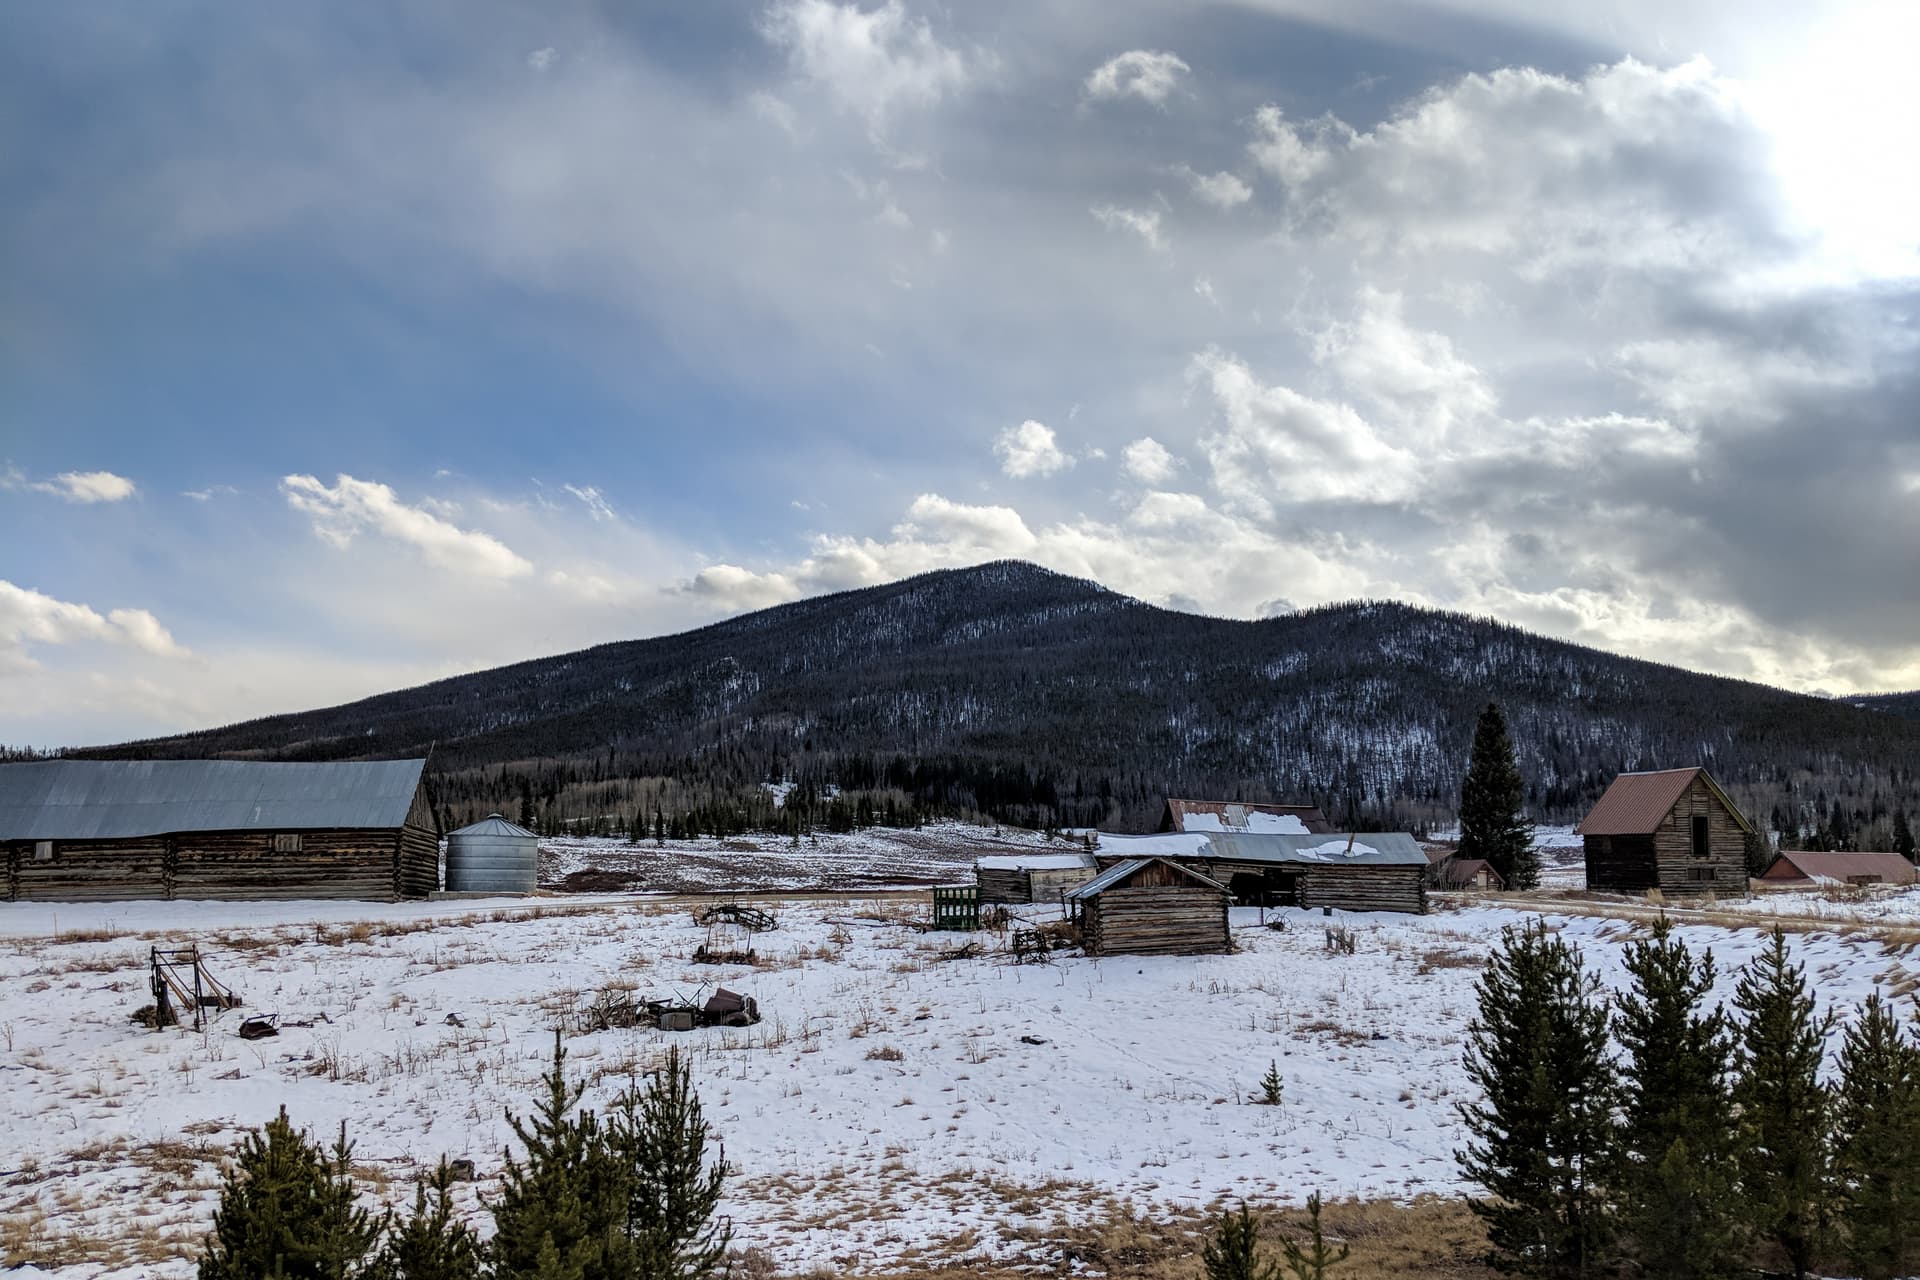 Looking out across a snowy high country ranch. A small mountain rises behind the ranch buildings.